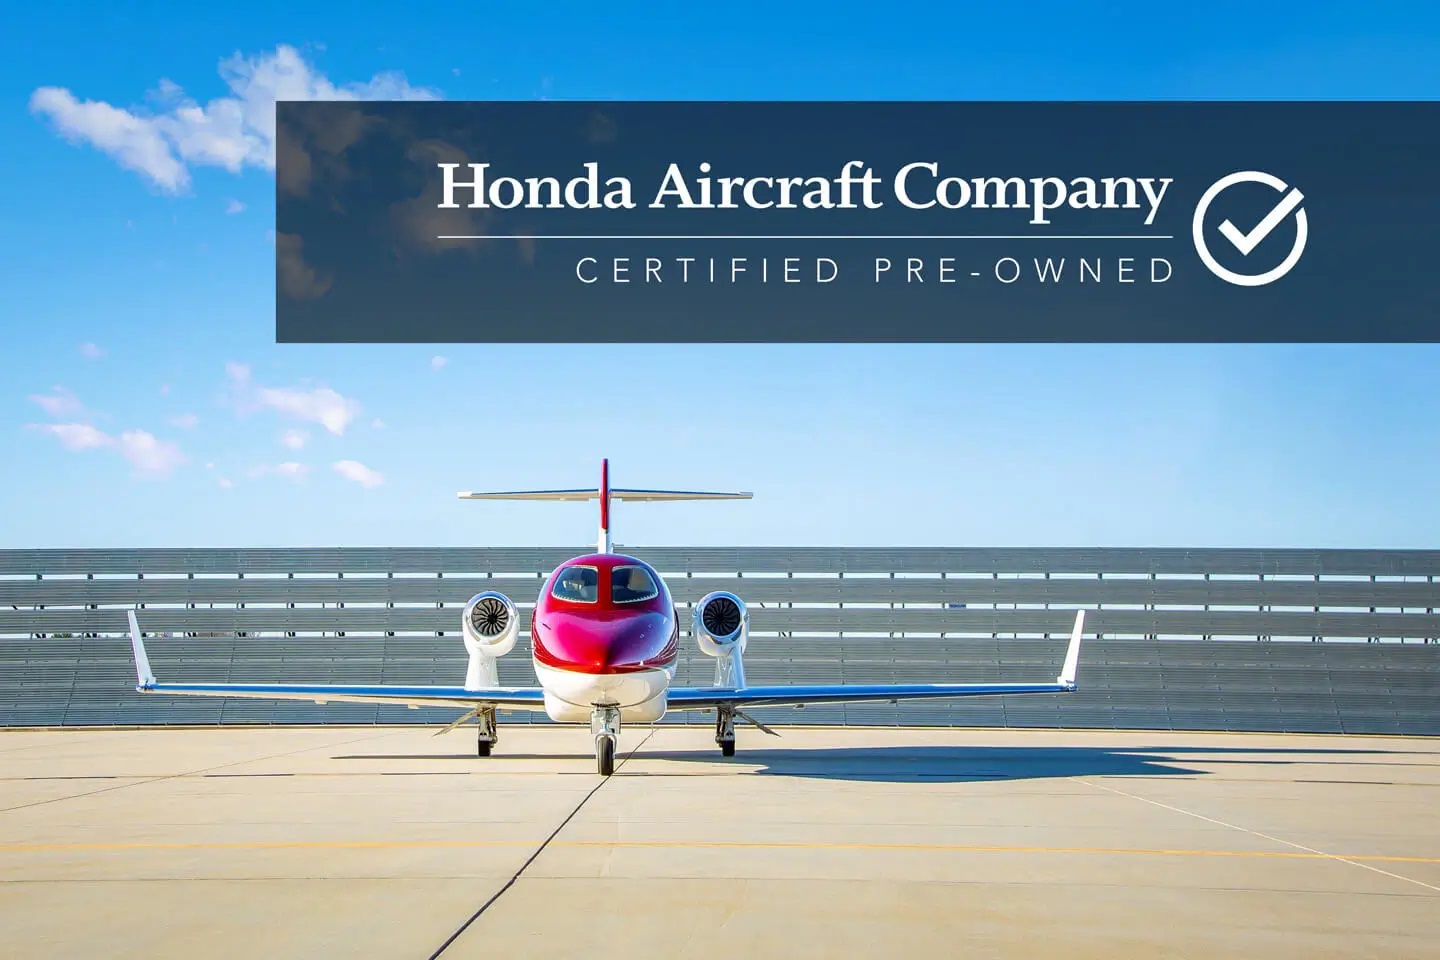 Honda Aircraft Company Rolls Out Certified Pre-Owned Program